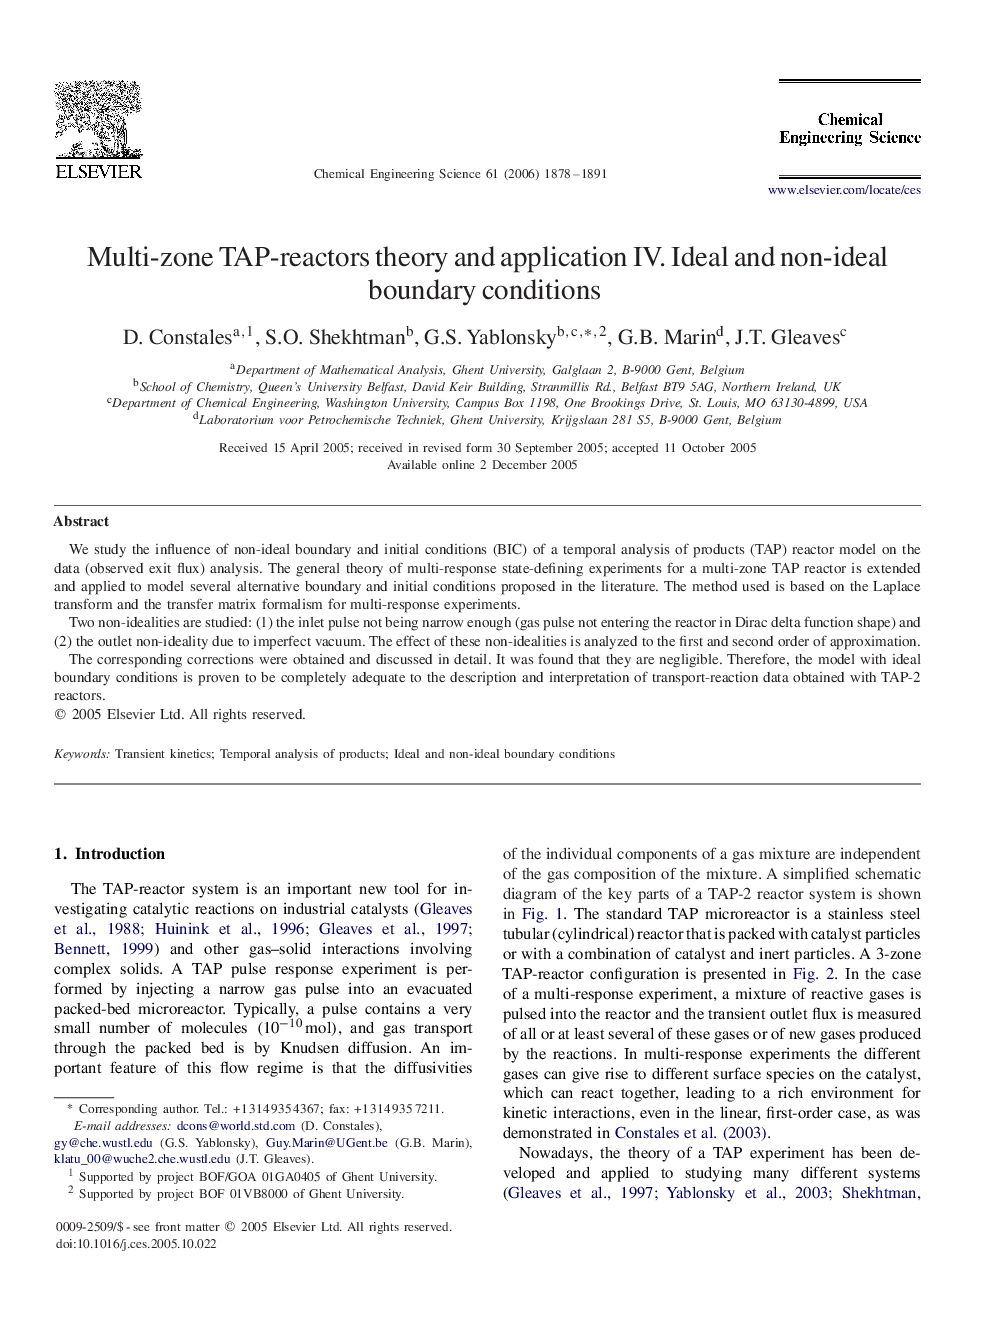 Multi-zone TAP-reactors theory and application IV. Ideal and non-ideal boundary conditions